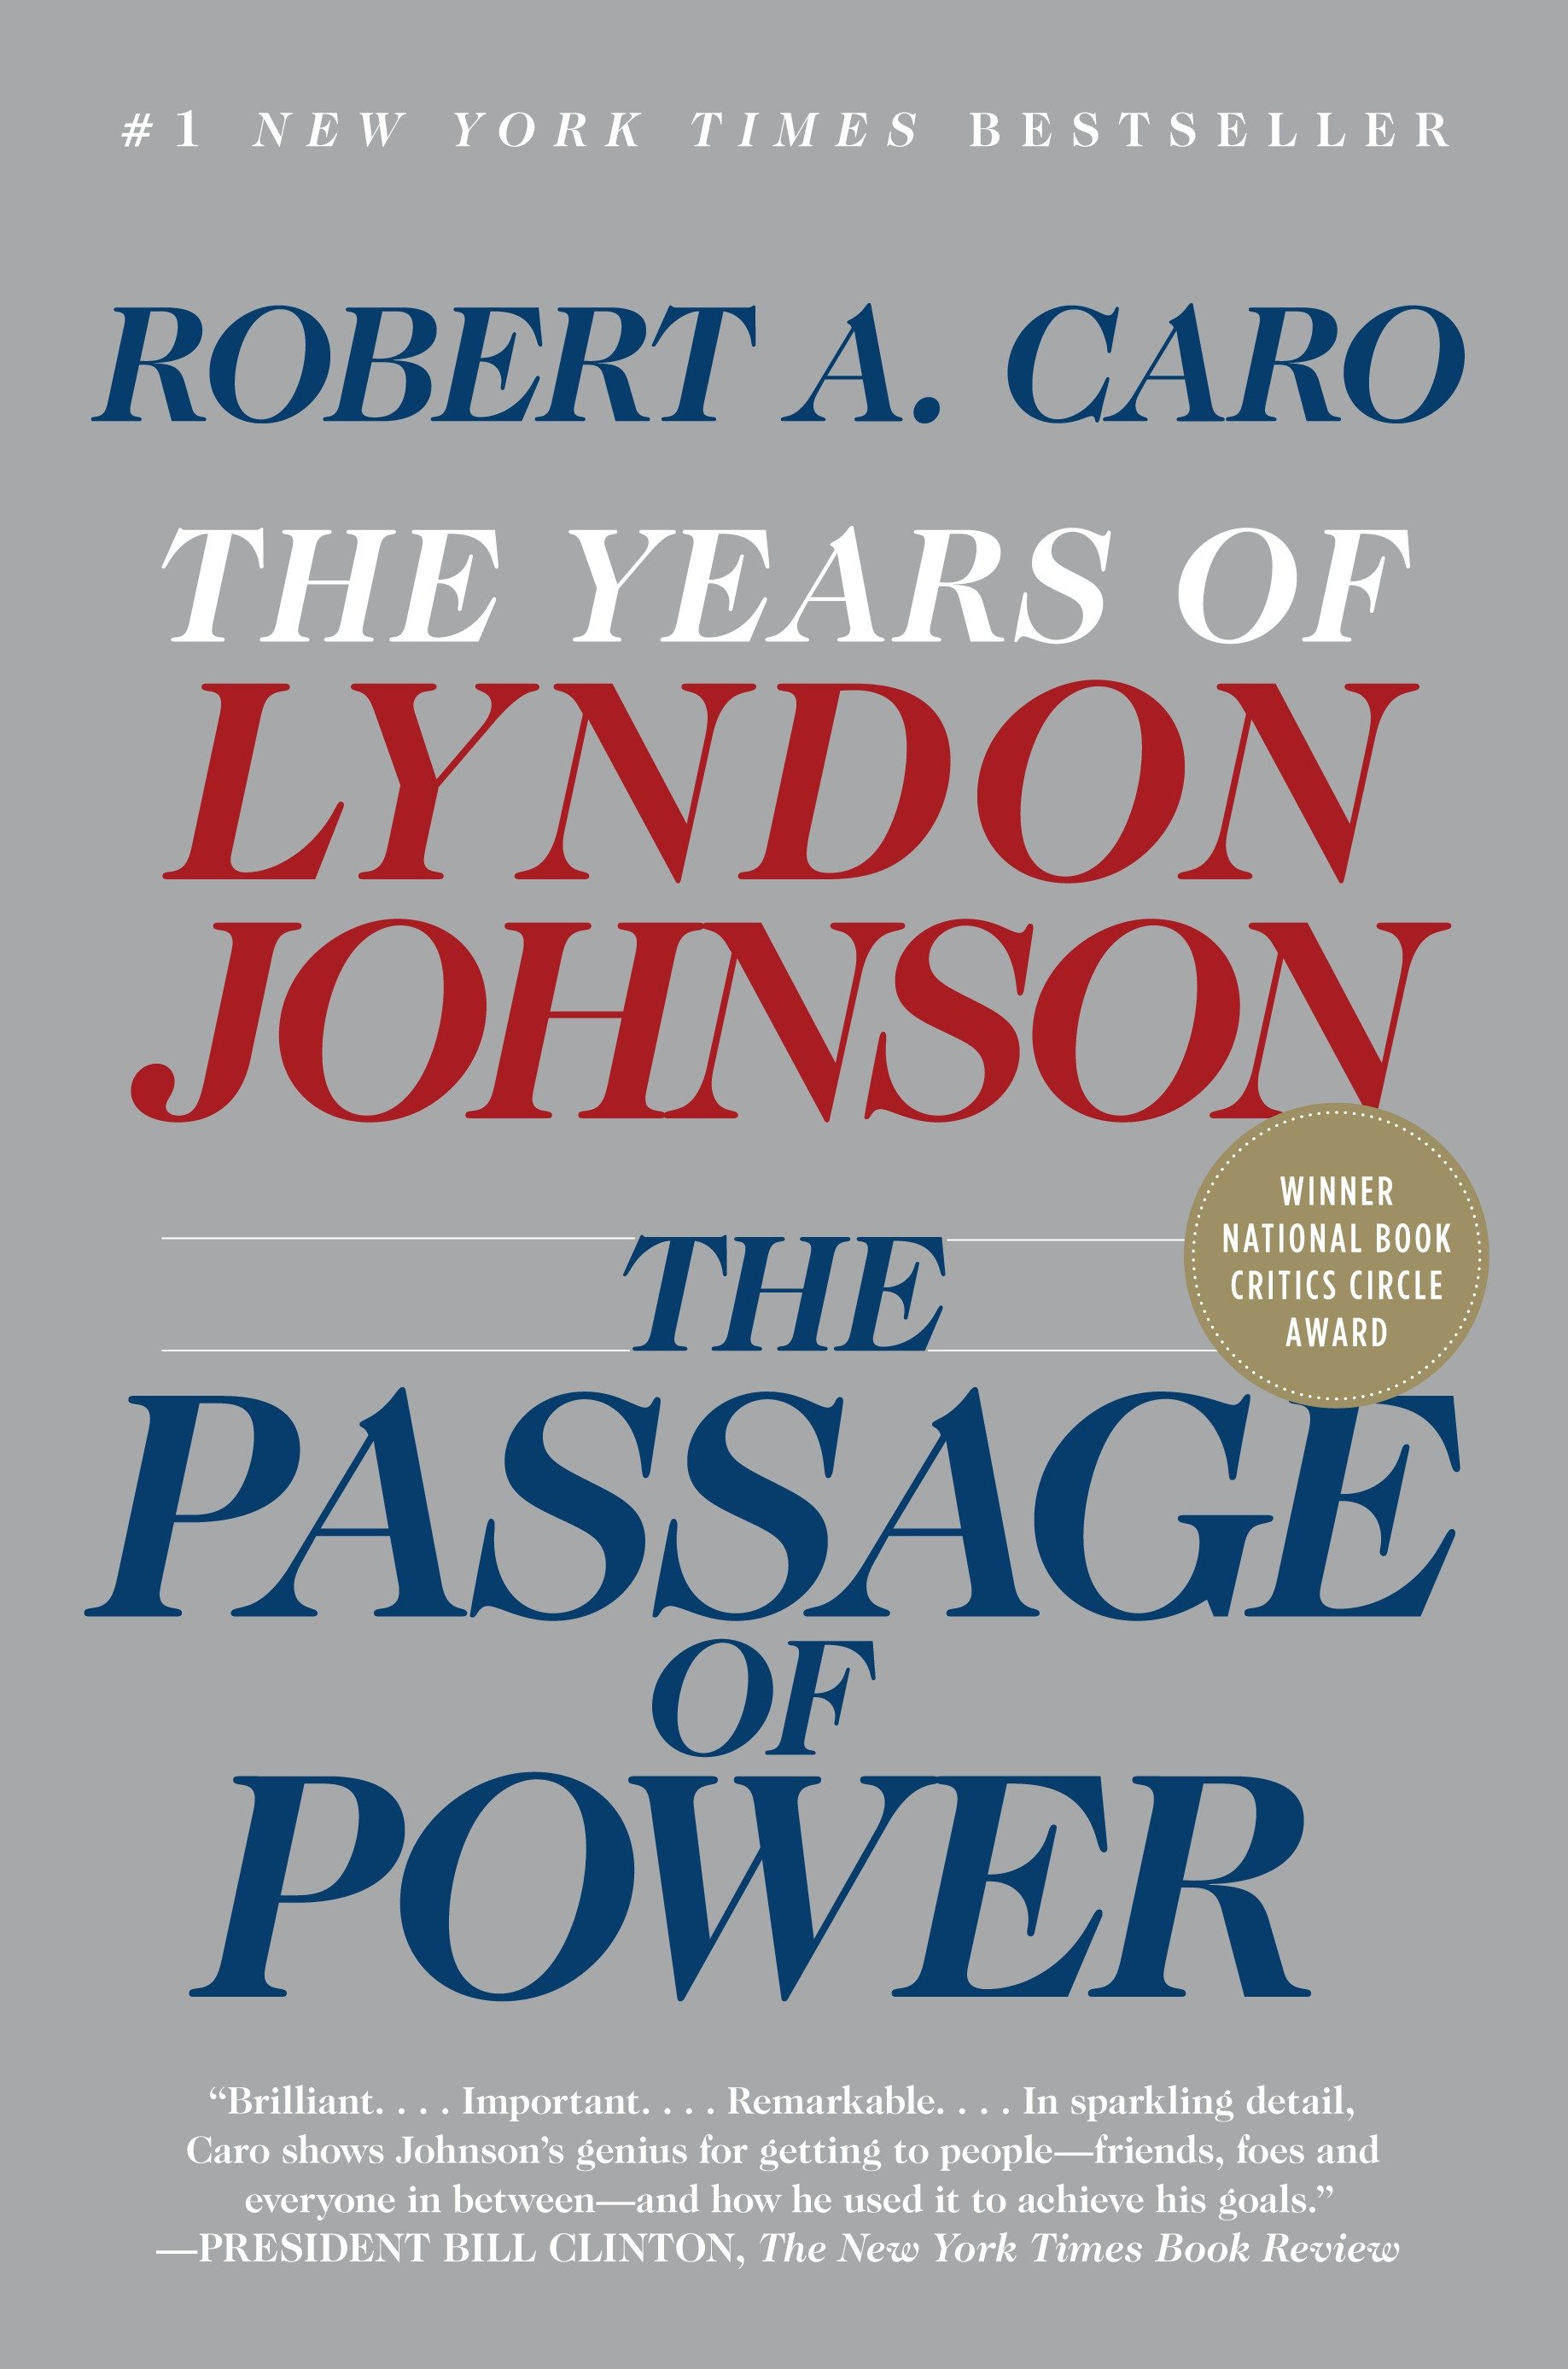 The passage of power the years of Lyndon Johnson cover image